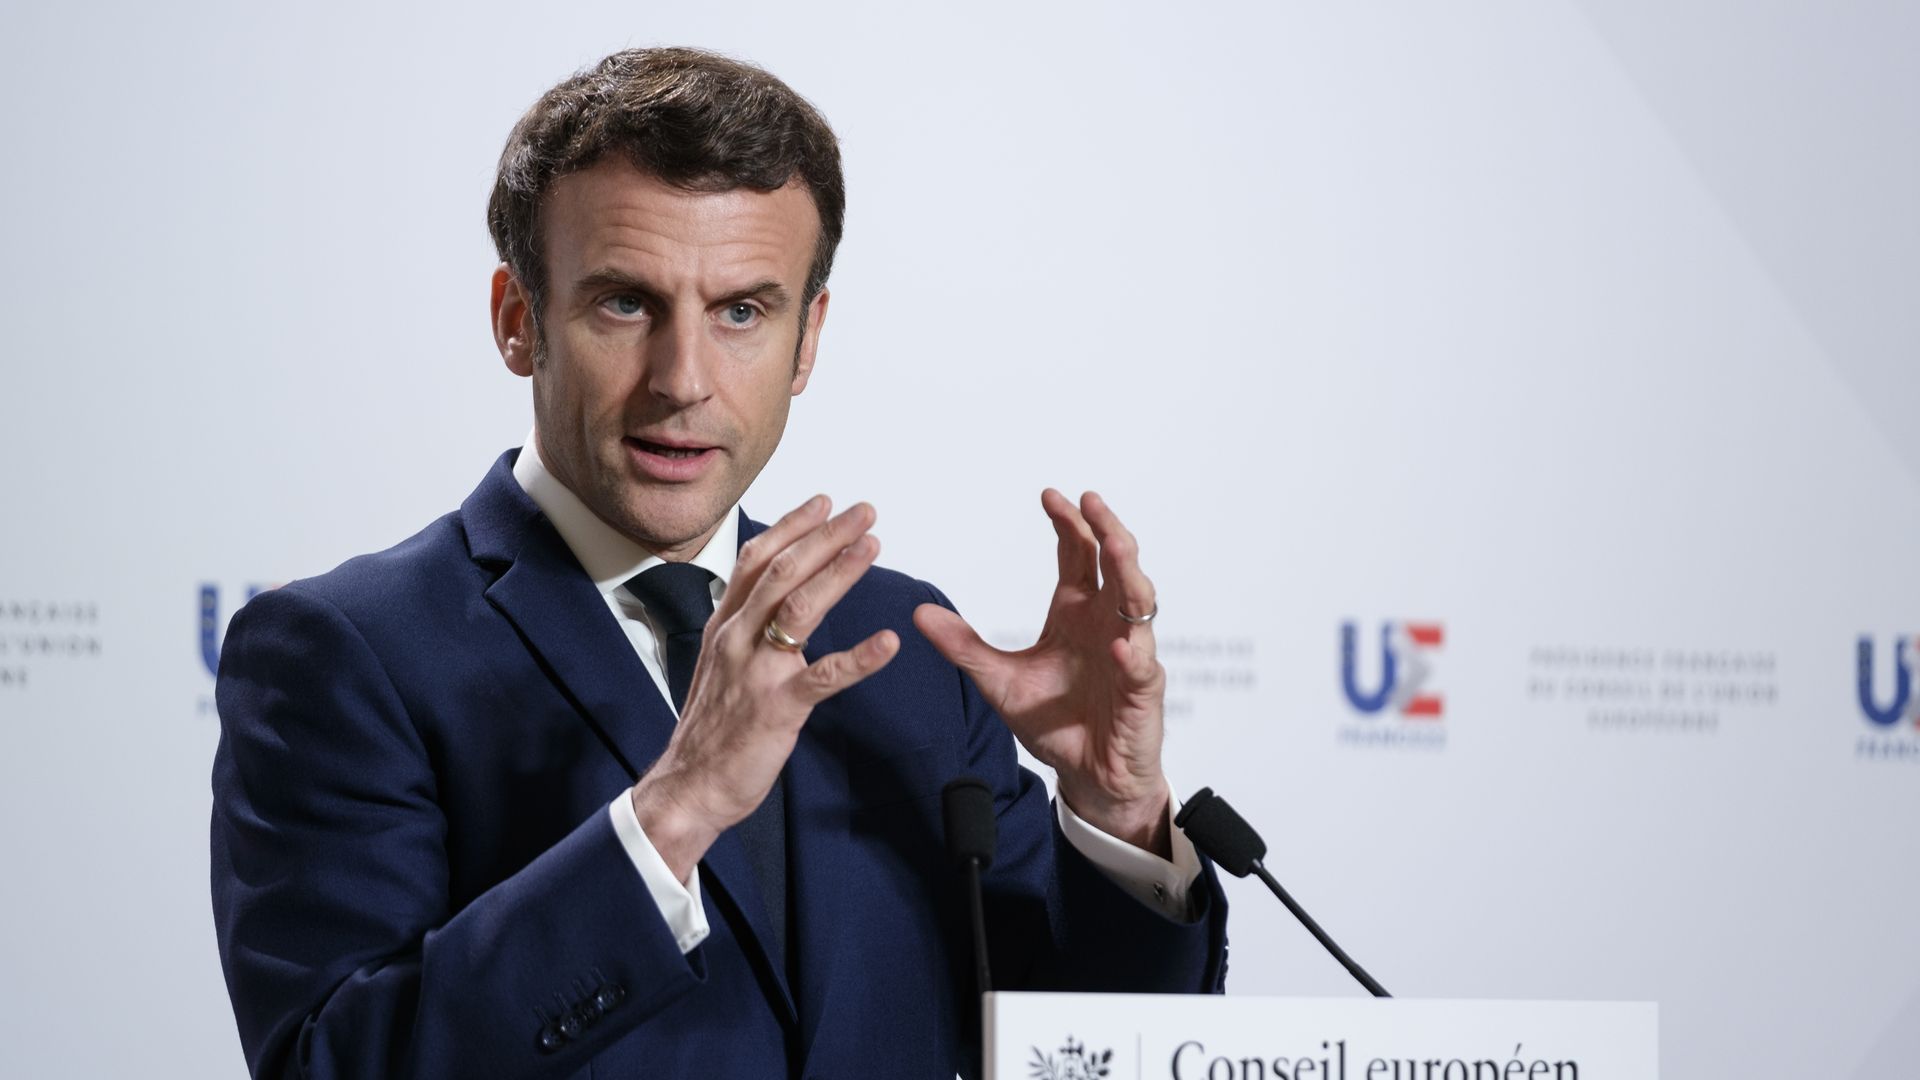 Emmanuel Macron is talking to the media at the end of an EU Summit on March 25, 2022 in Brussels, Belgium